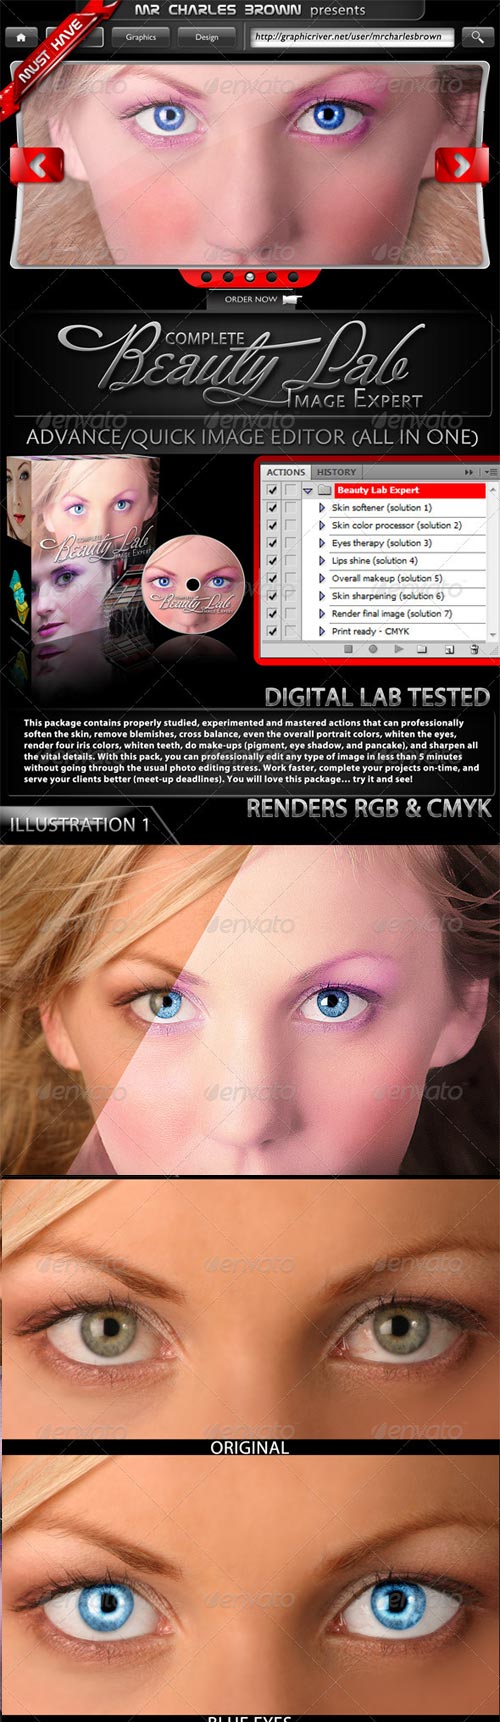 Complete Beauty Lab Image Expert - GraphicRiver